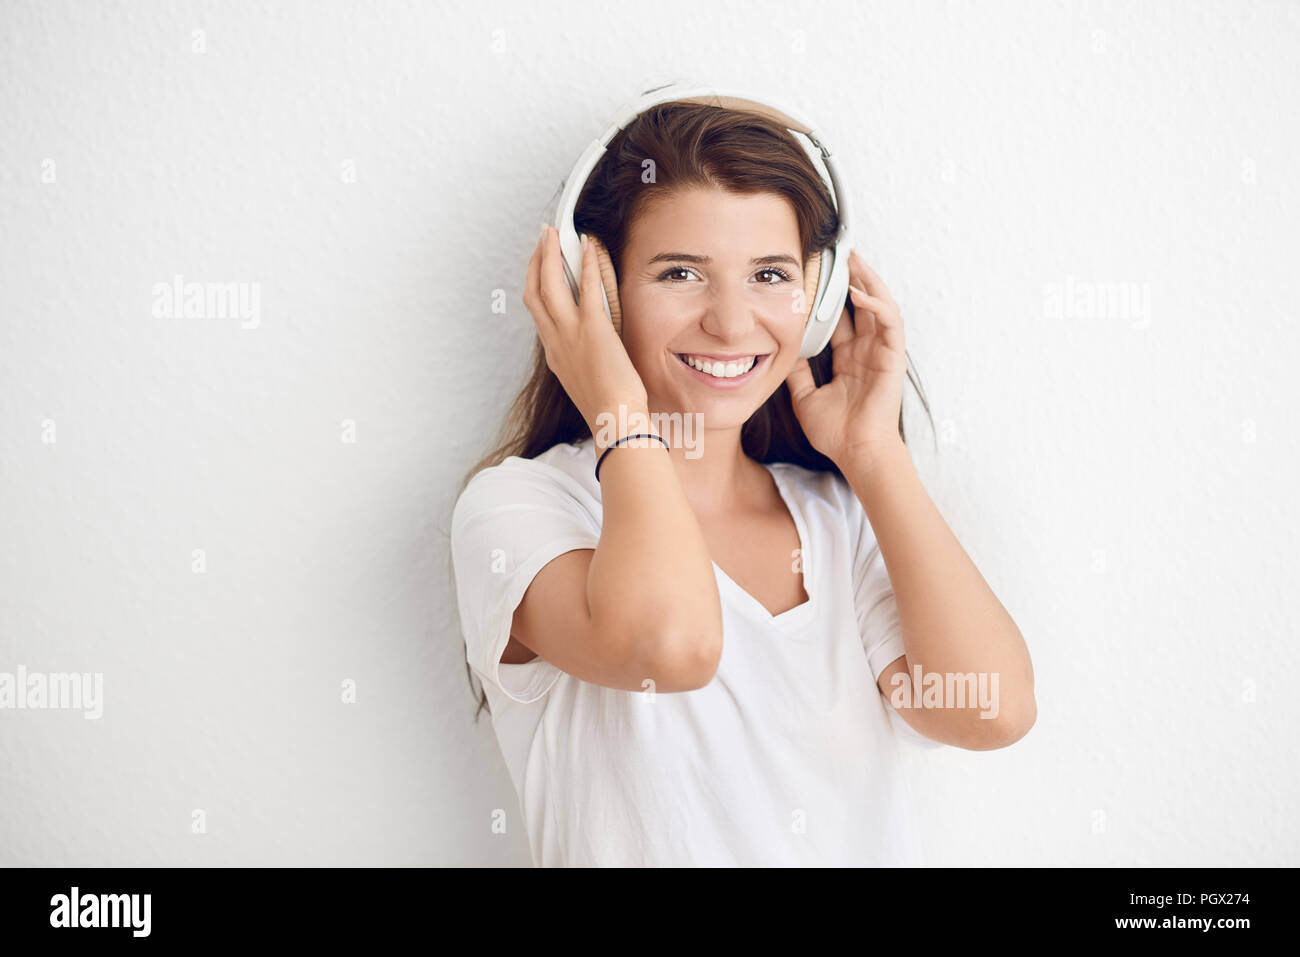 Woman Laughing against wall Stock Photo - Alamy